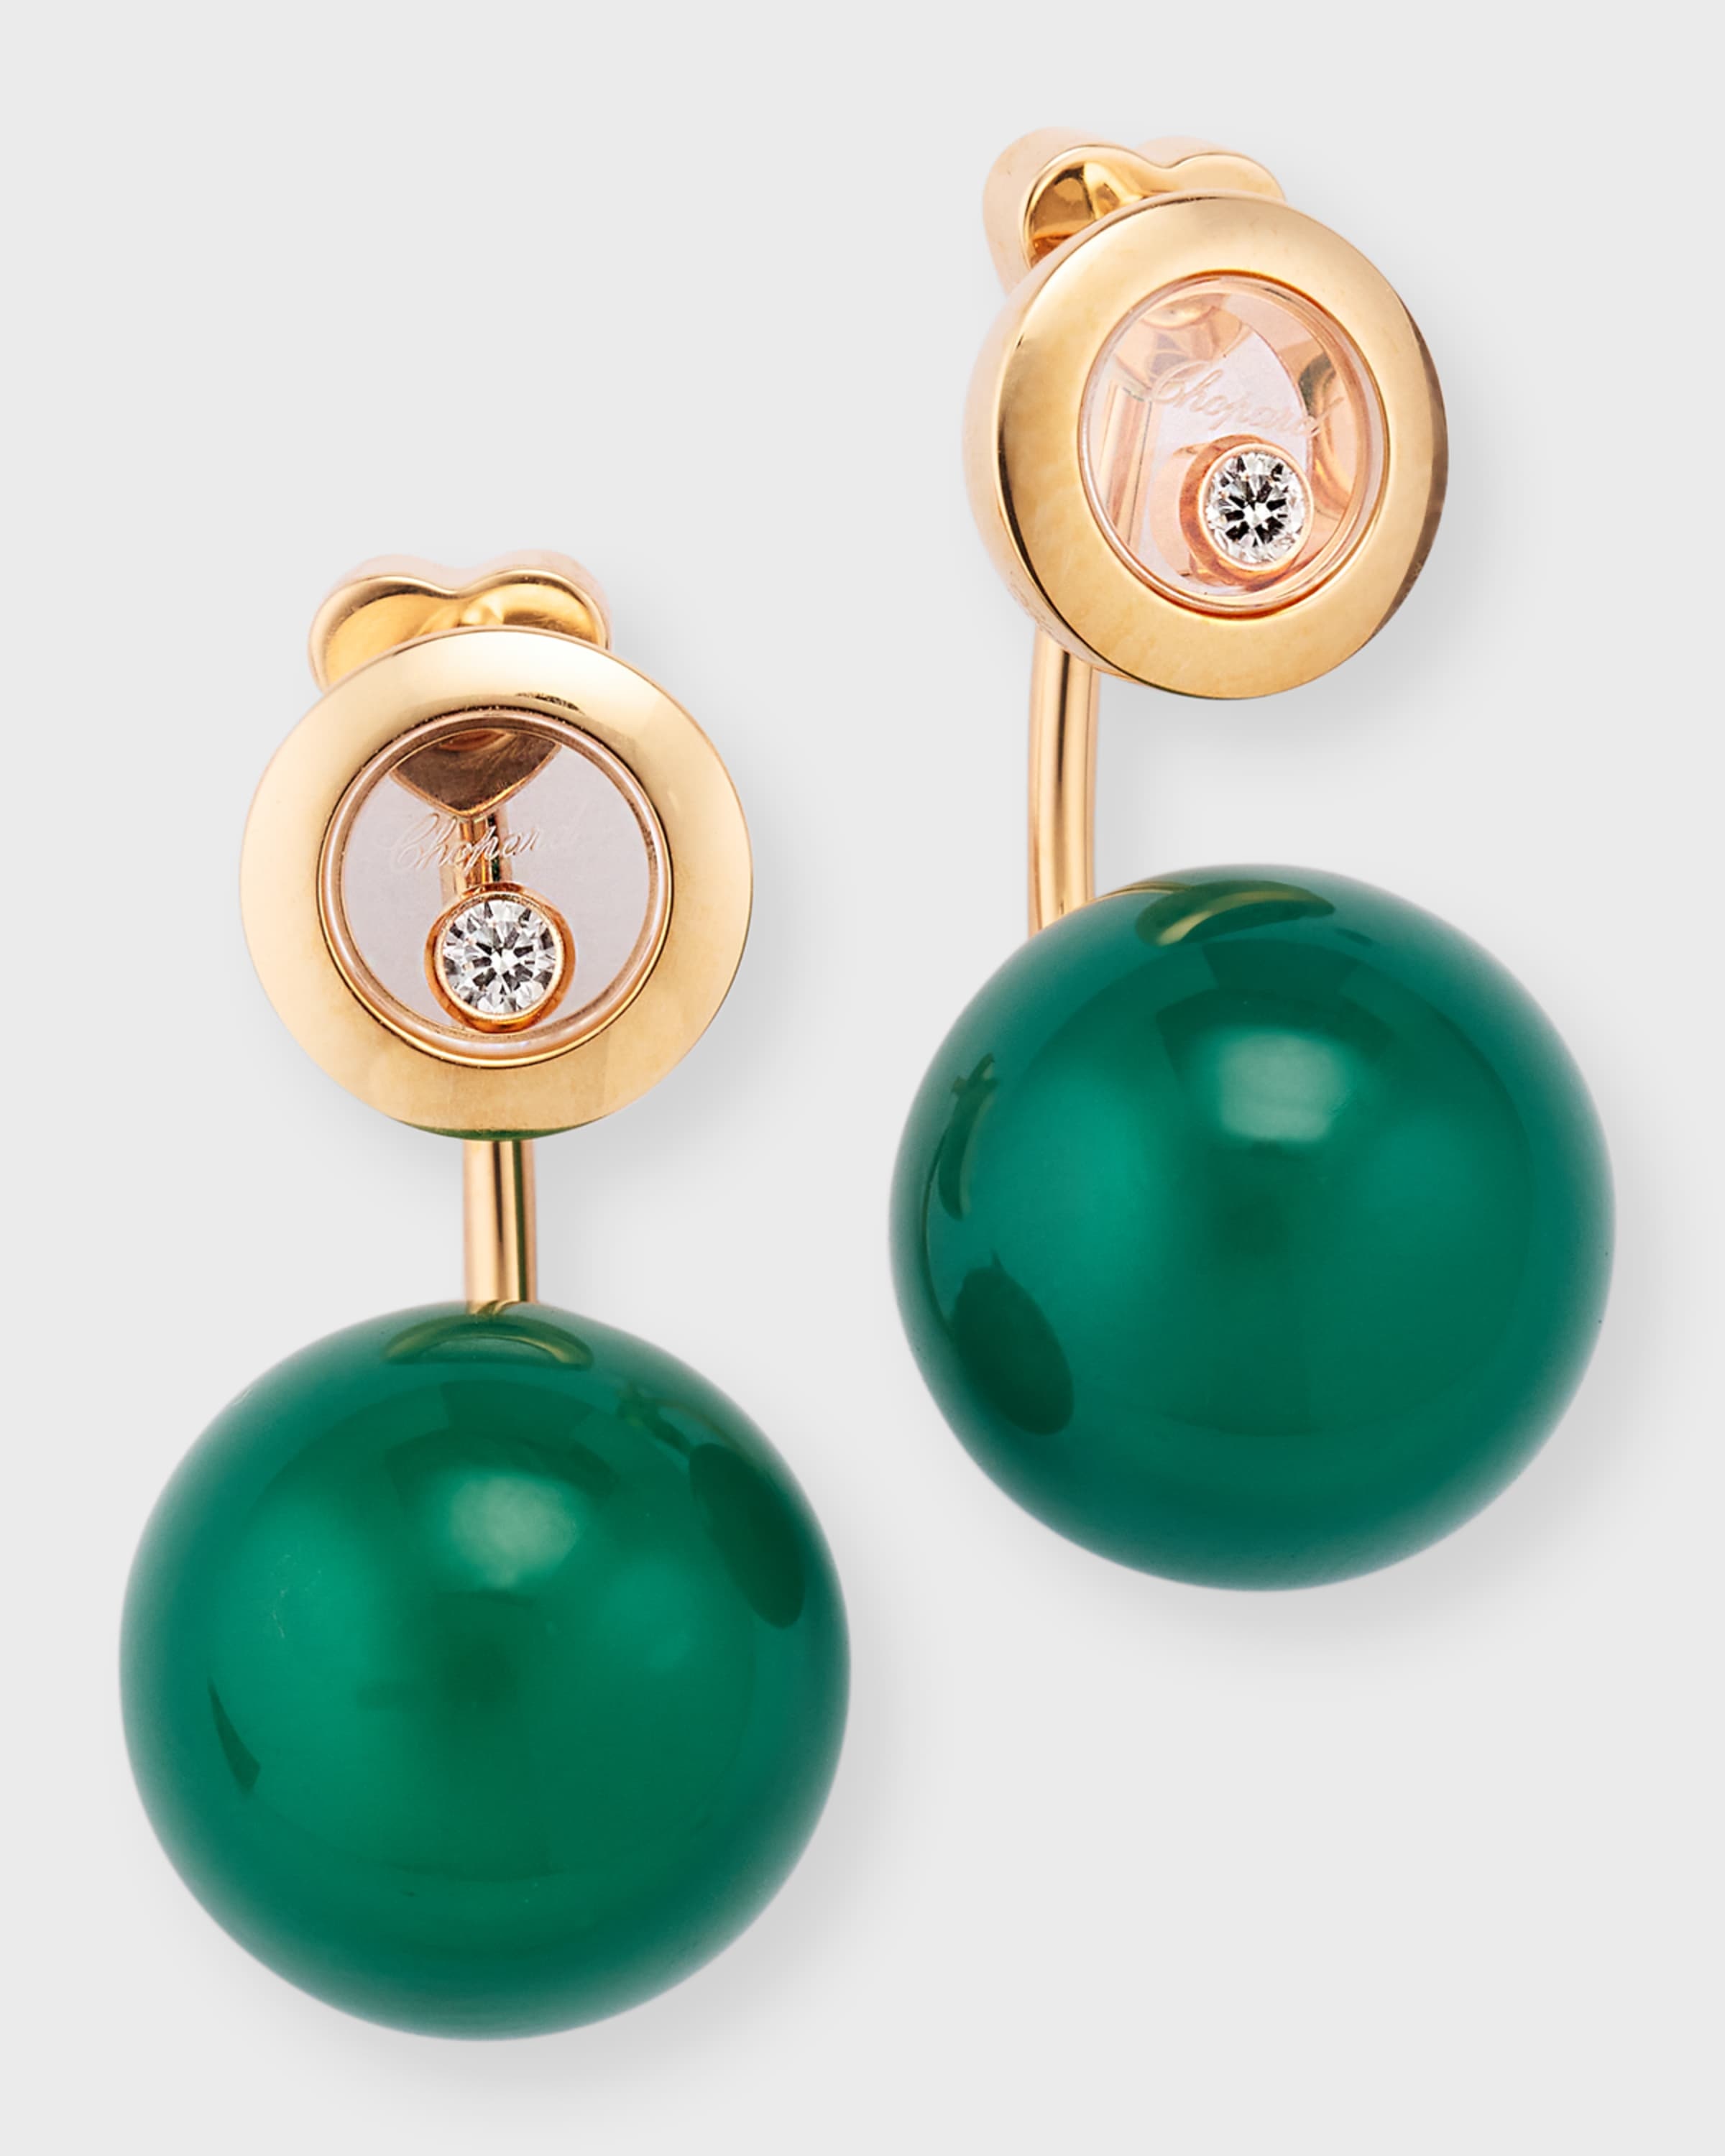 Happy Diamonds Planet 18K Rose Gold and Green Agate Earrings - 4